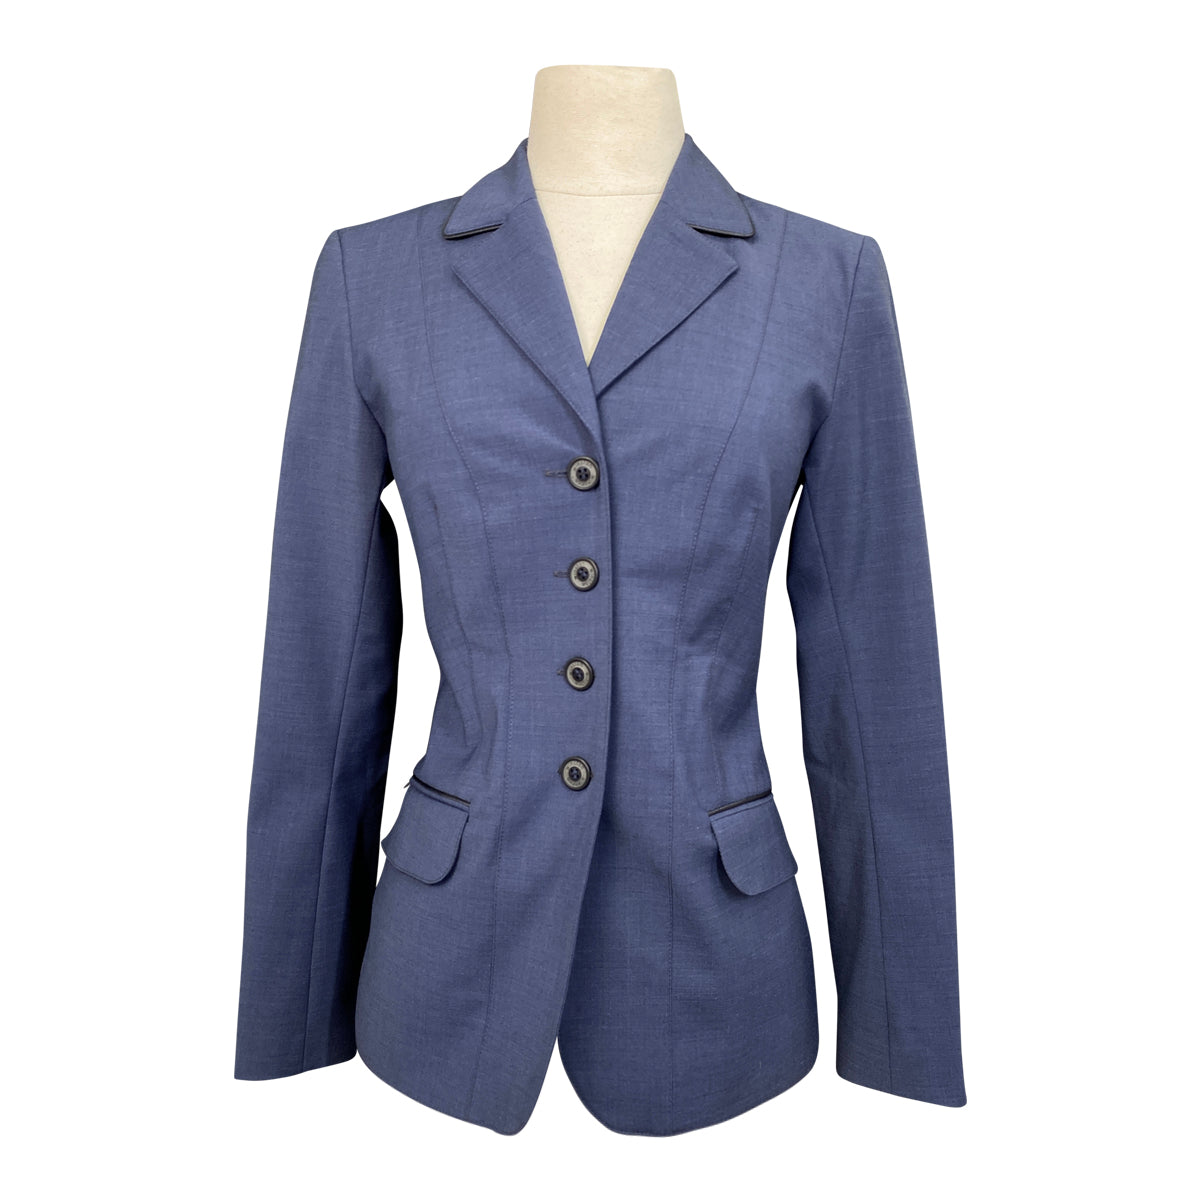 Winston Equestrian Contrast Competition Coat in Mid Blue/Black Piping